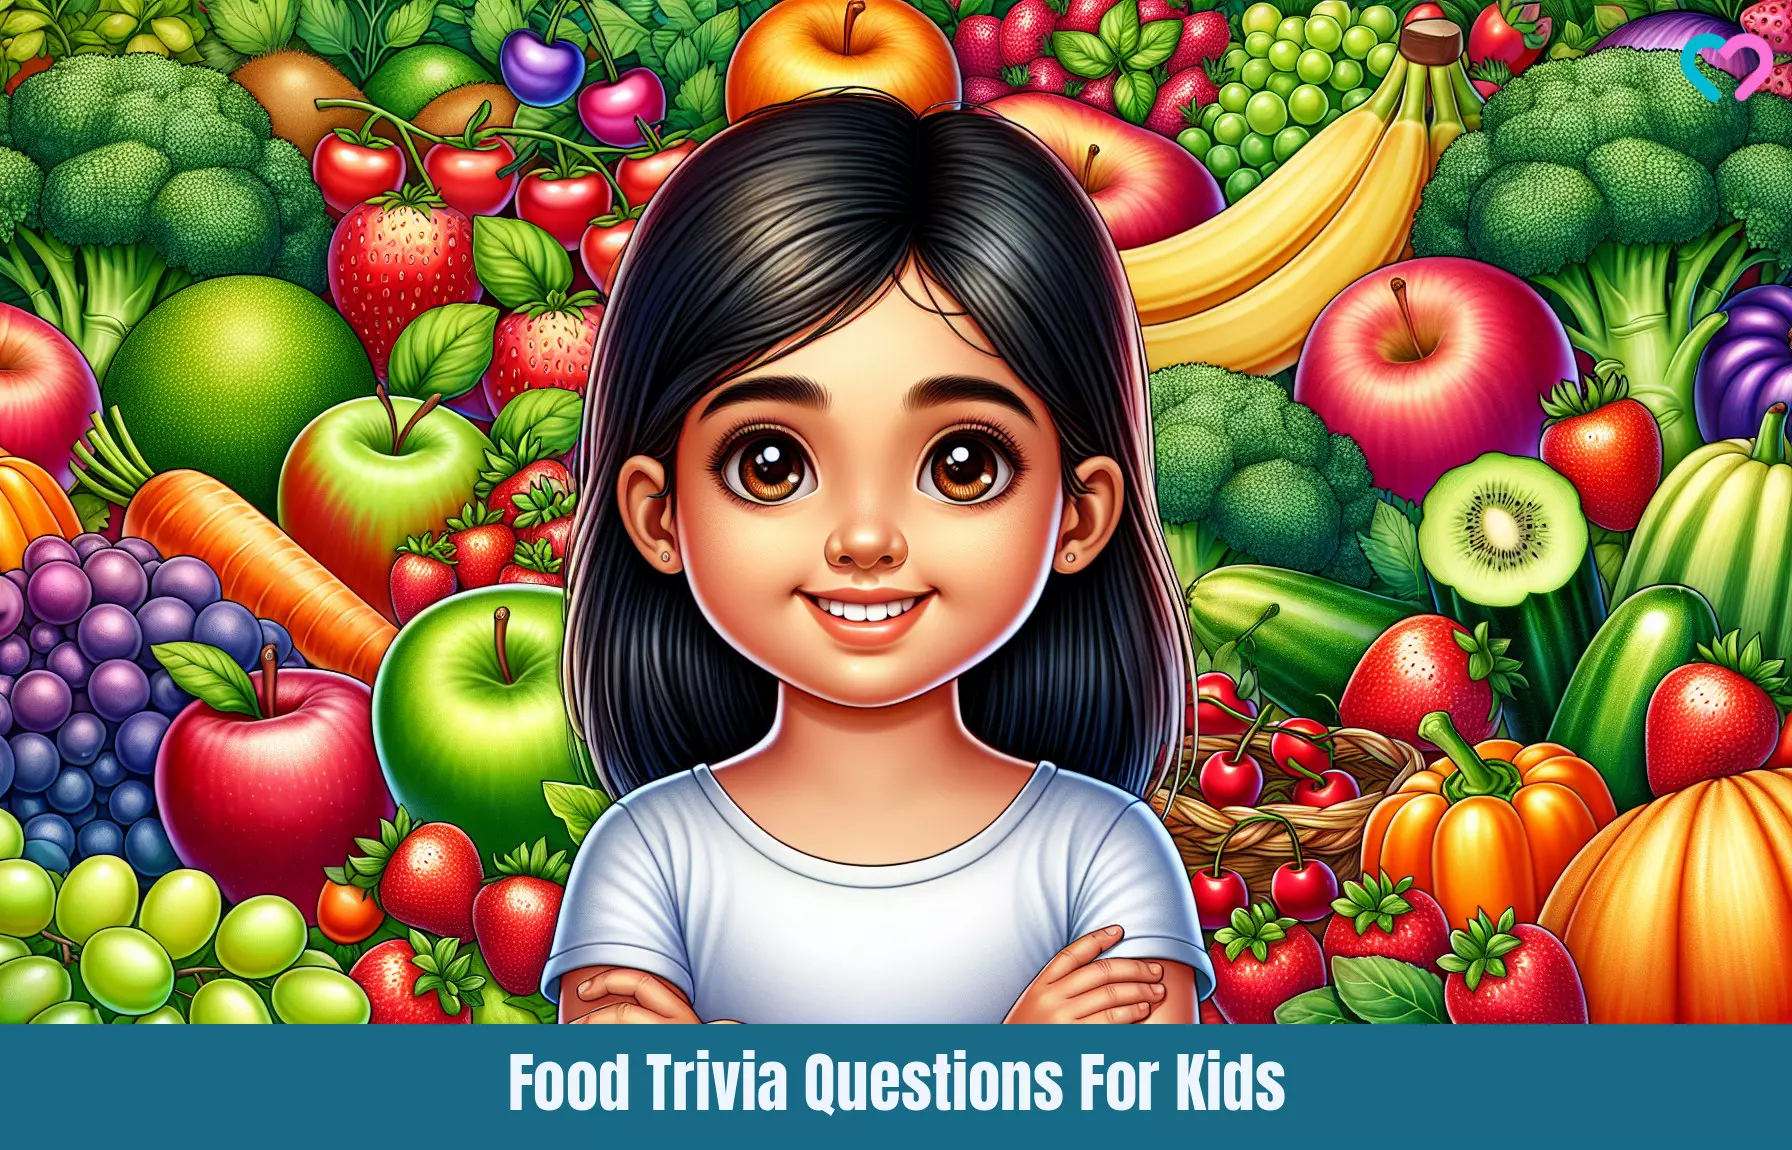 Food Trivia Questions For Kids_illustration